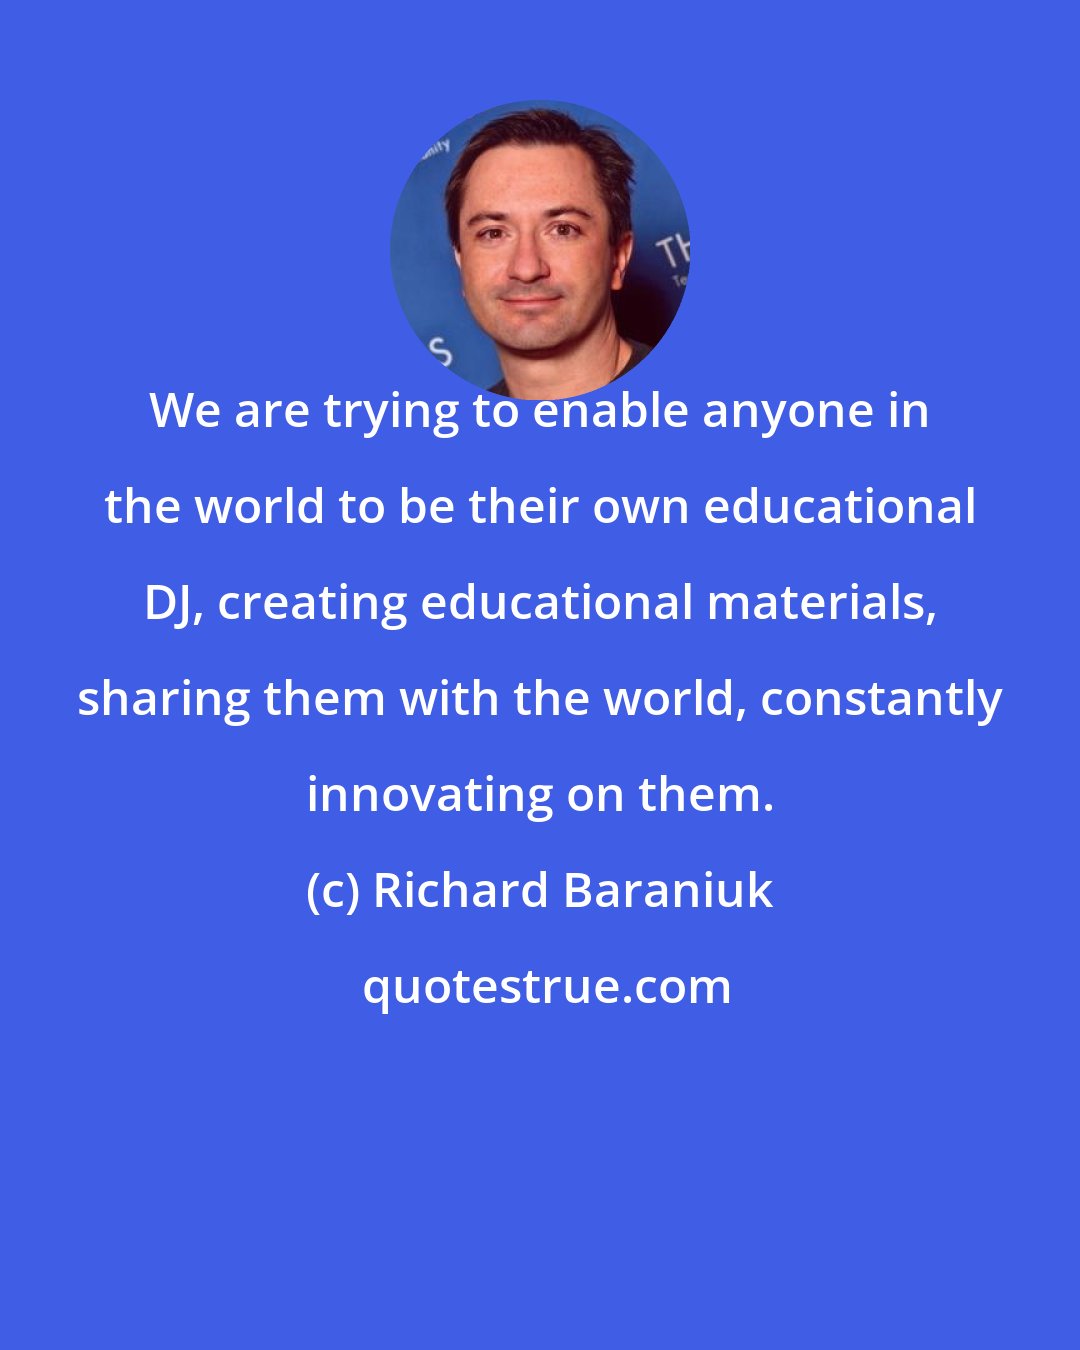 Richard Baraniuk: We are trying to enable anyone in the world to be their own educational DJ, creating educational materials, sharing them with the world, constantly innovating on them.